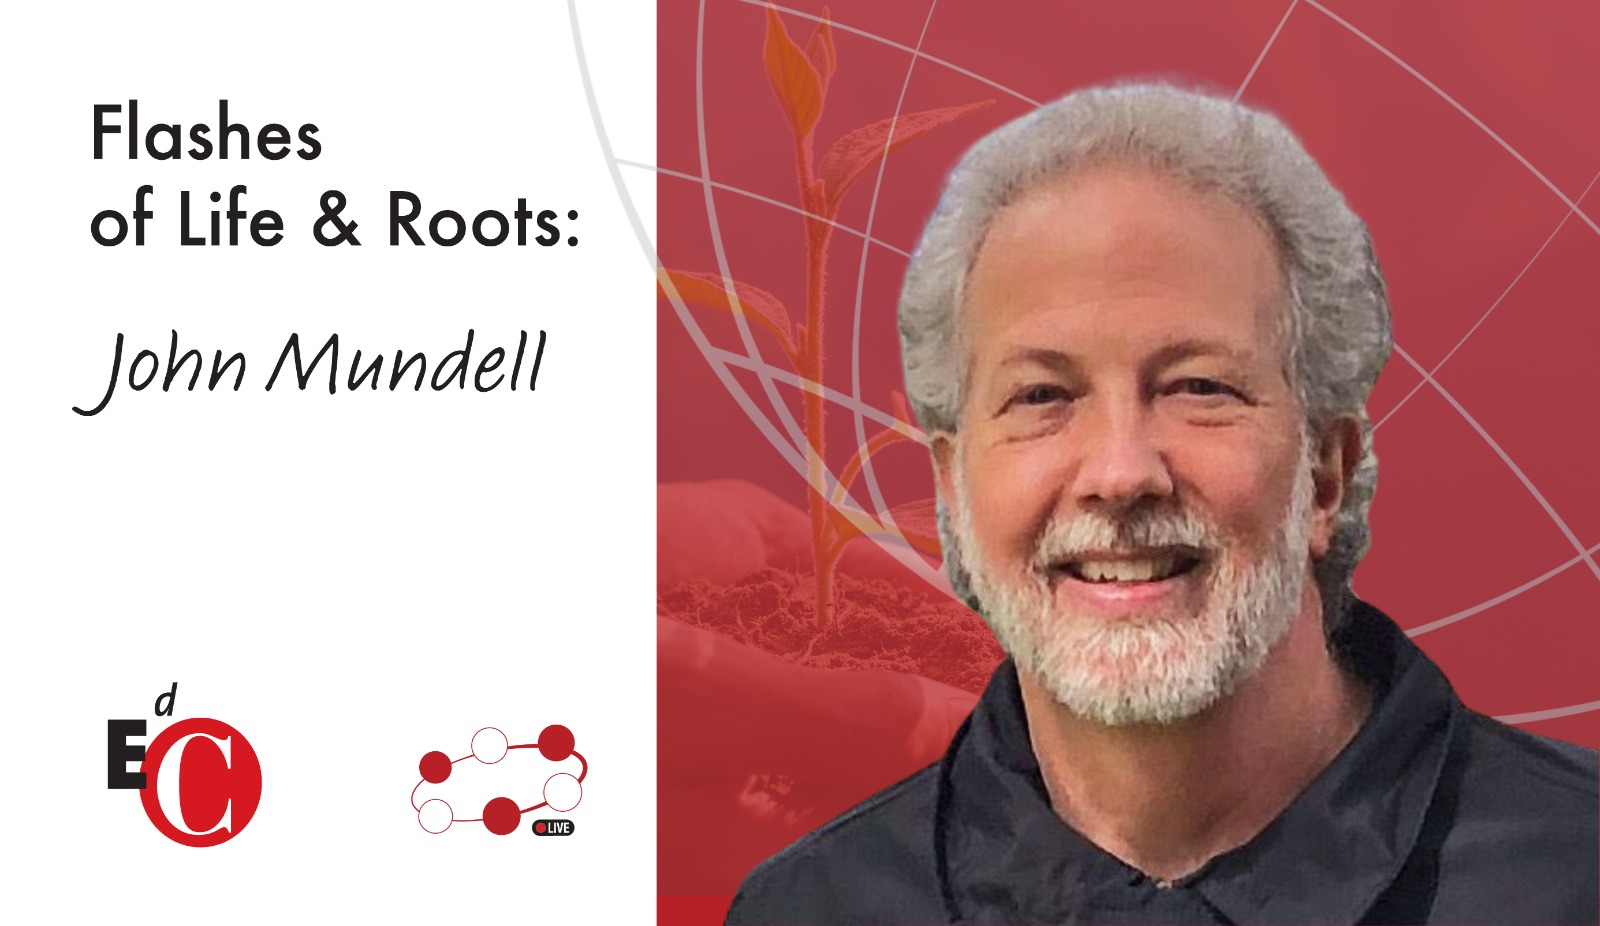 #FlashesofLife&Roots - Interview with John Mundell